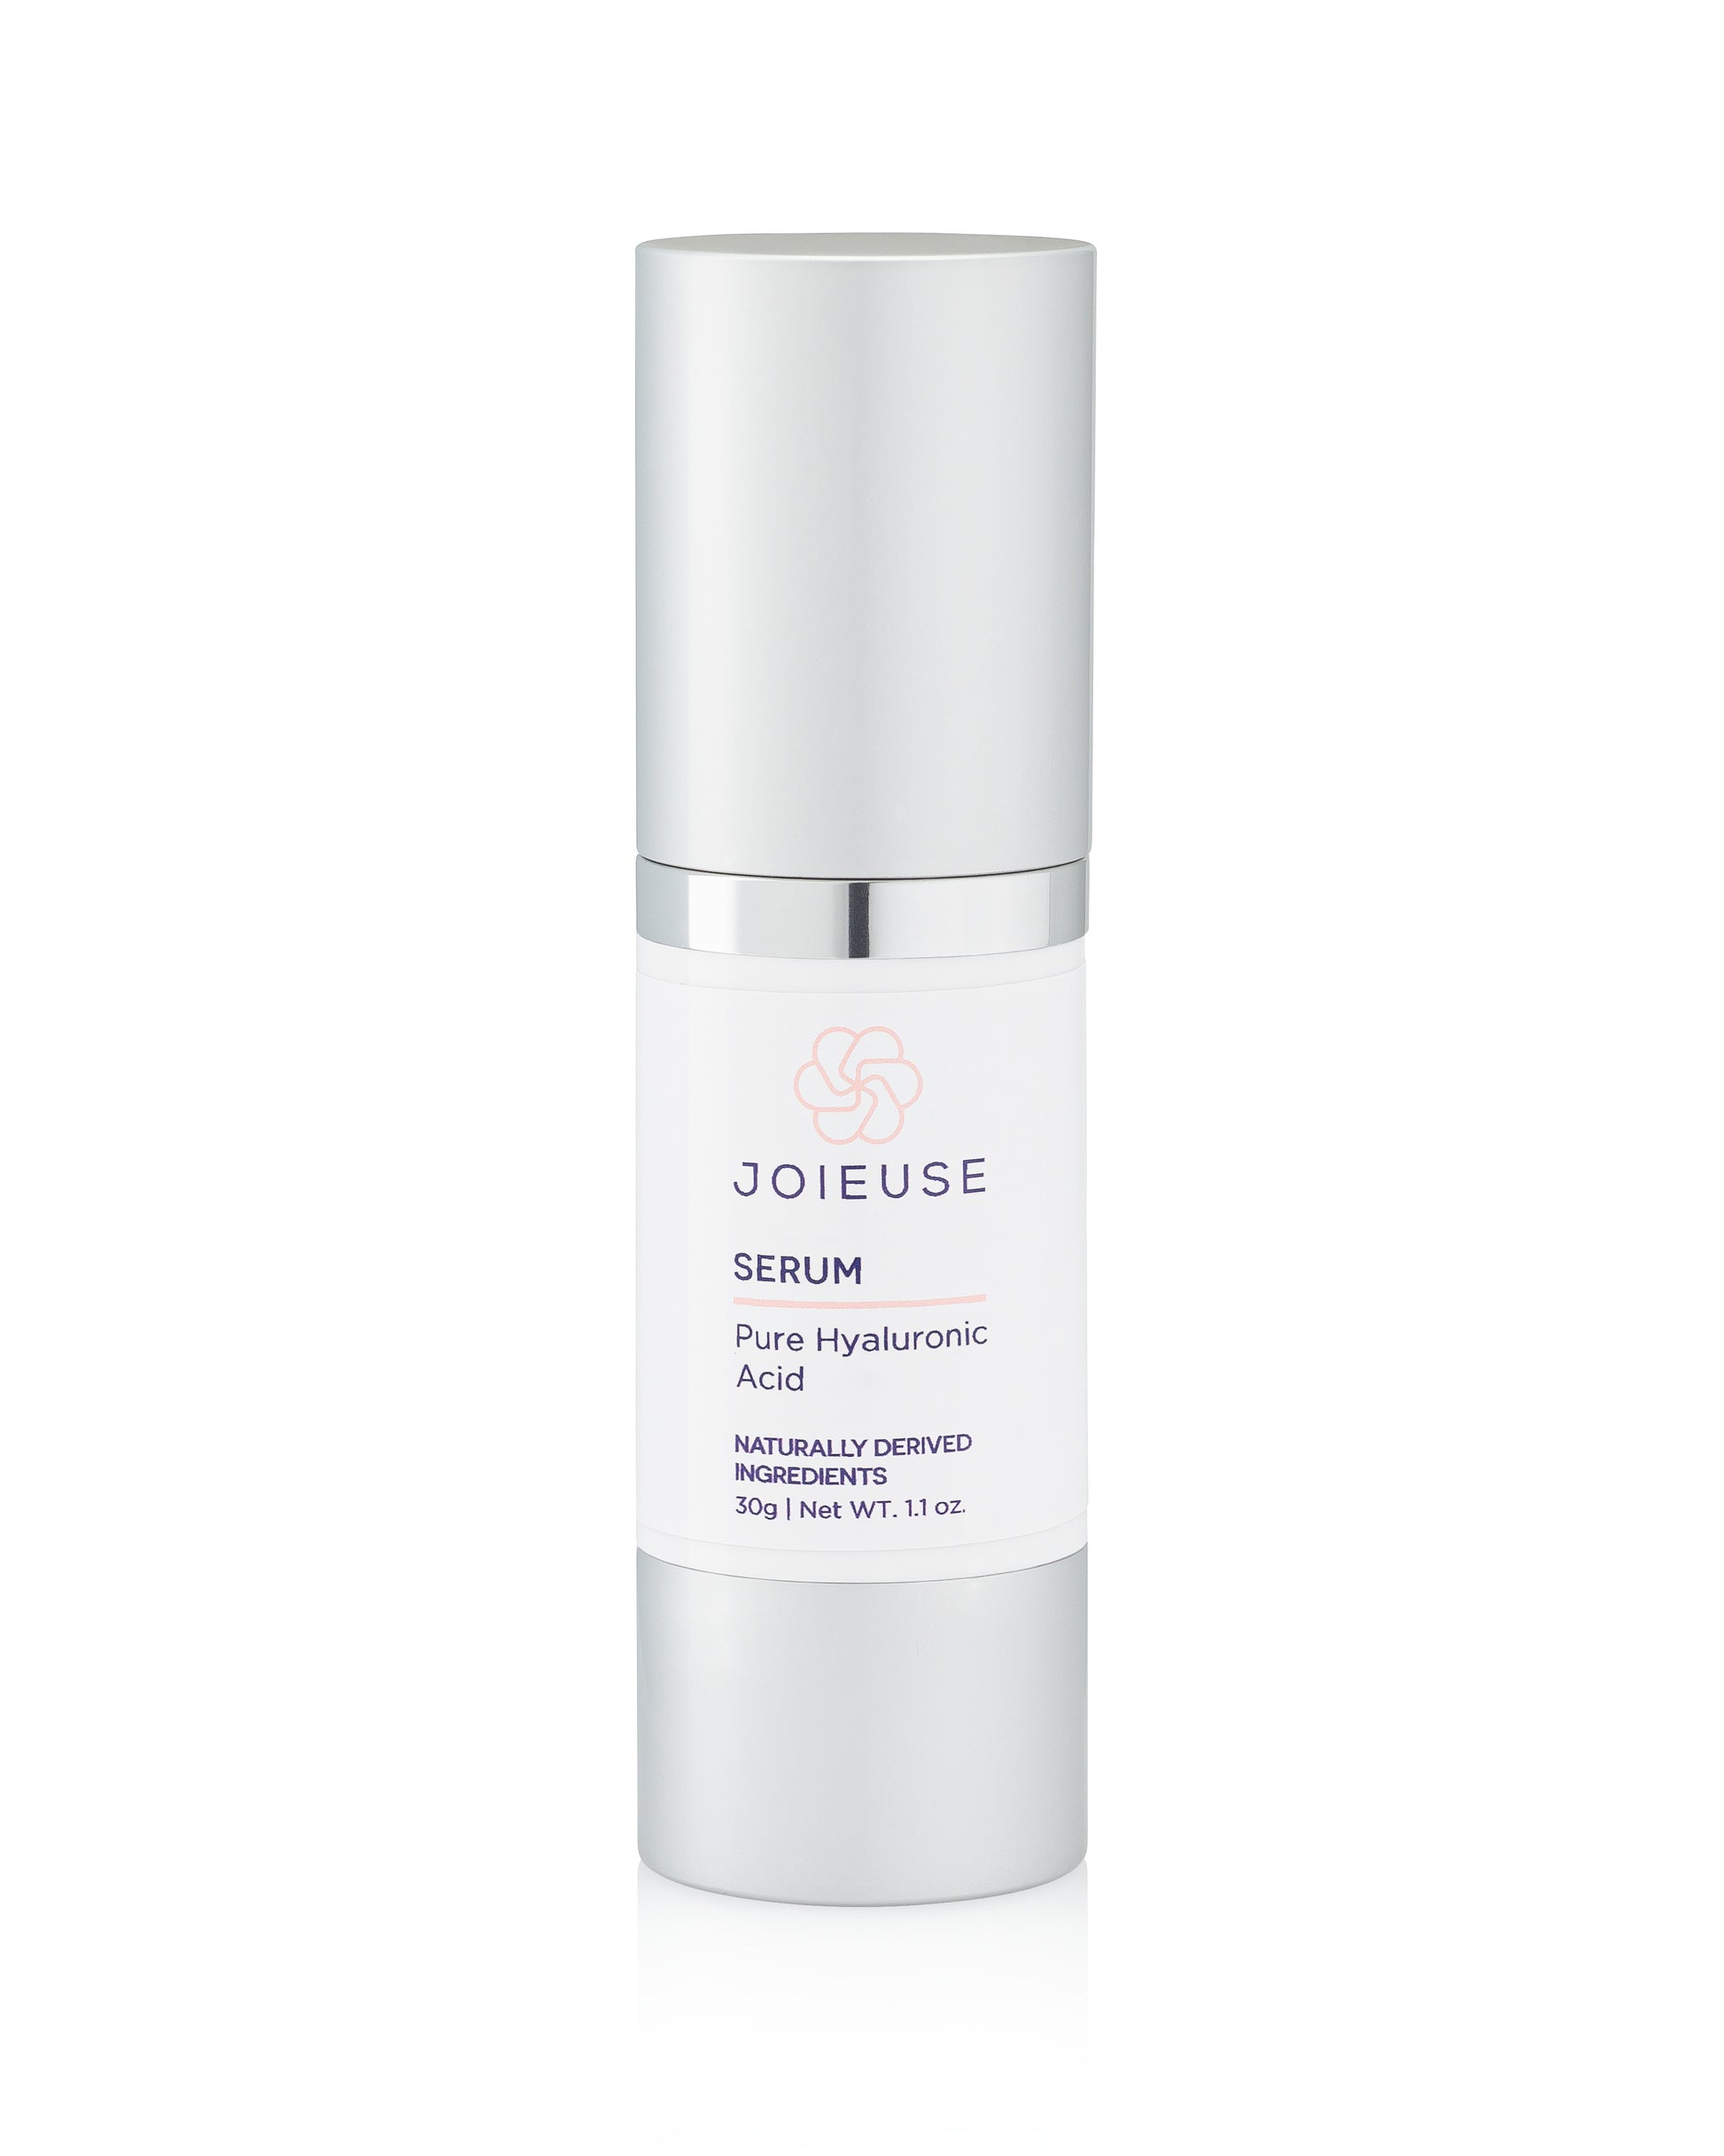 Joieuse Pure Hyaluronic Acid Serum for Oily Skin